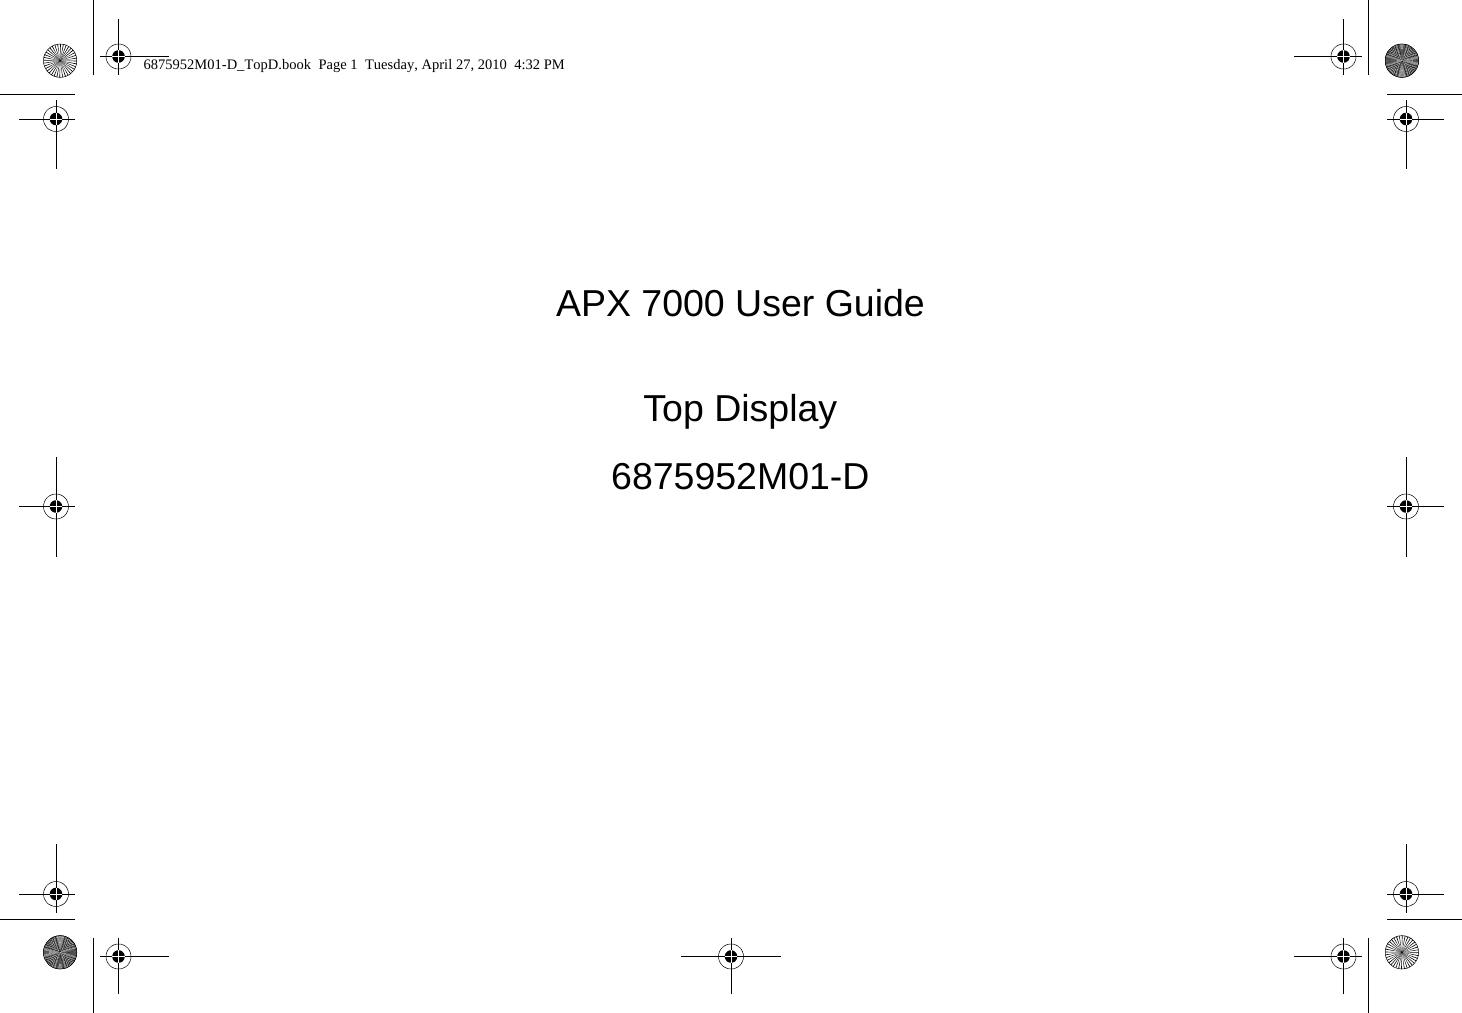 APX 7000 User GuideTop Display6875952M01-D6875952M01-D_TopD.book  Page 1  Tuesday, April 27, 2010  4:32 PM